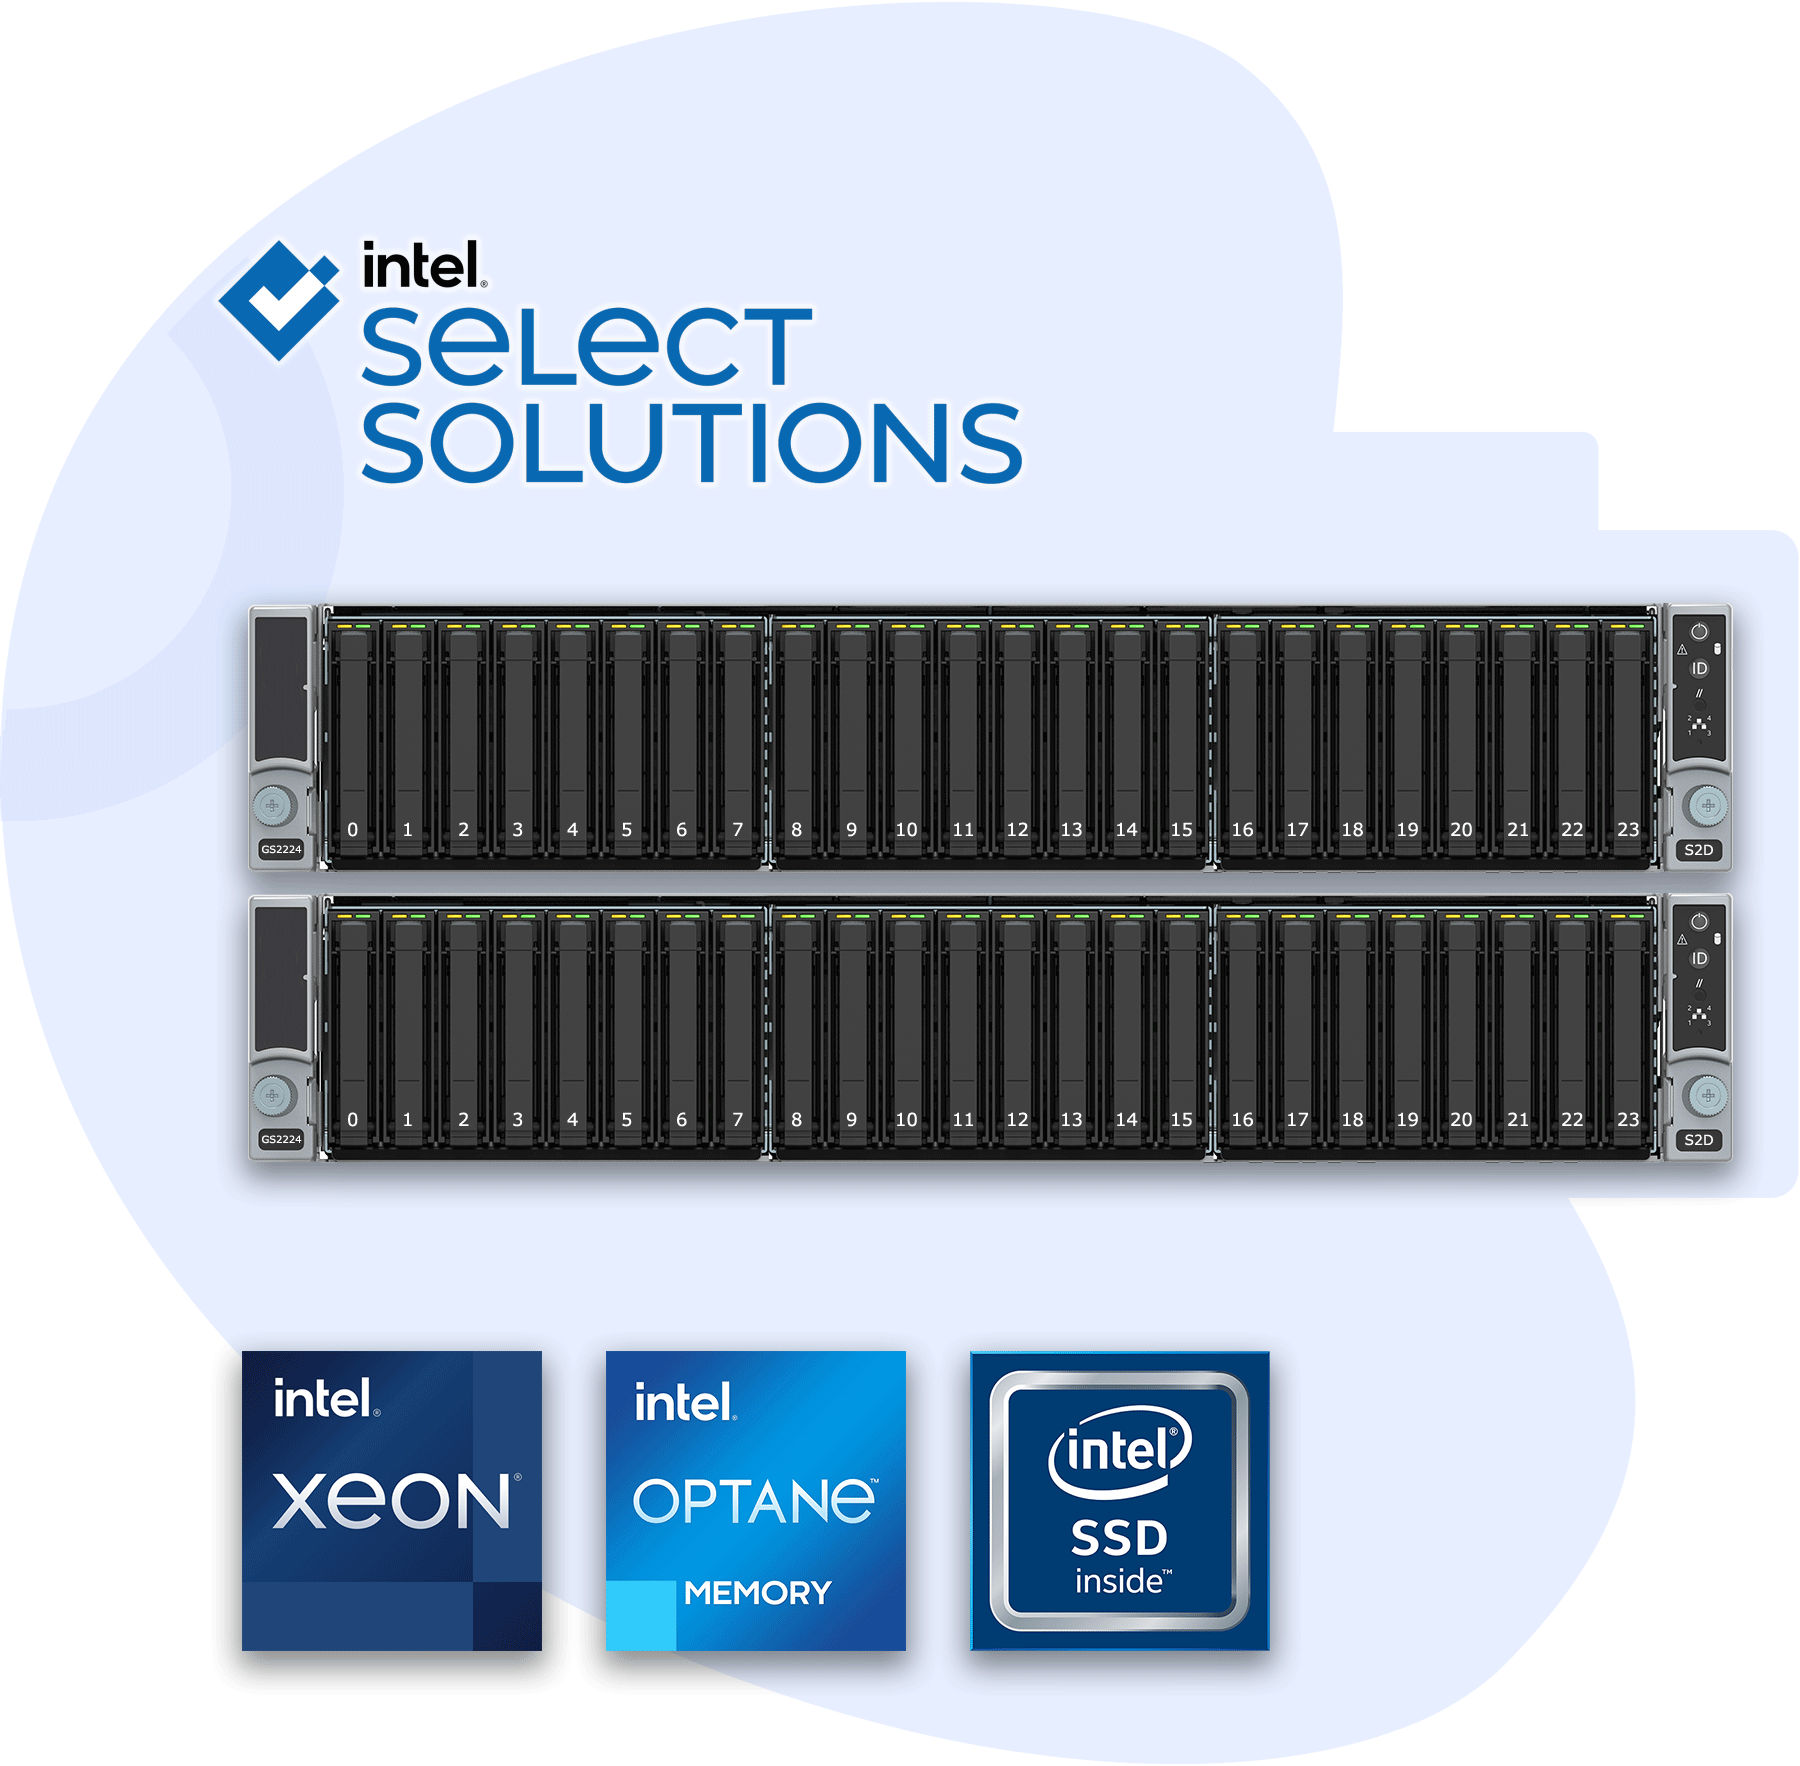 Azure Stack HCI and Intel Select Solutions